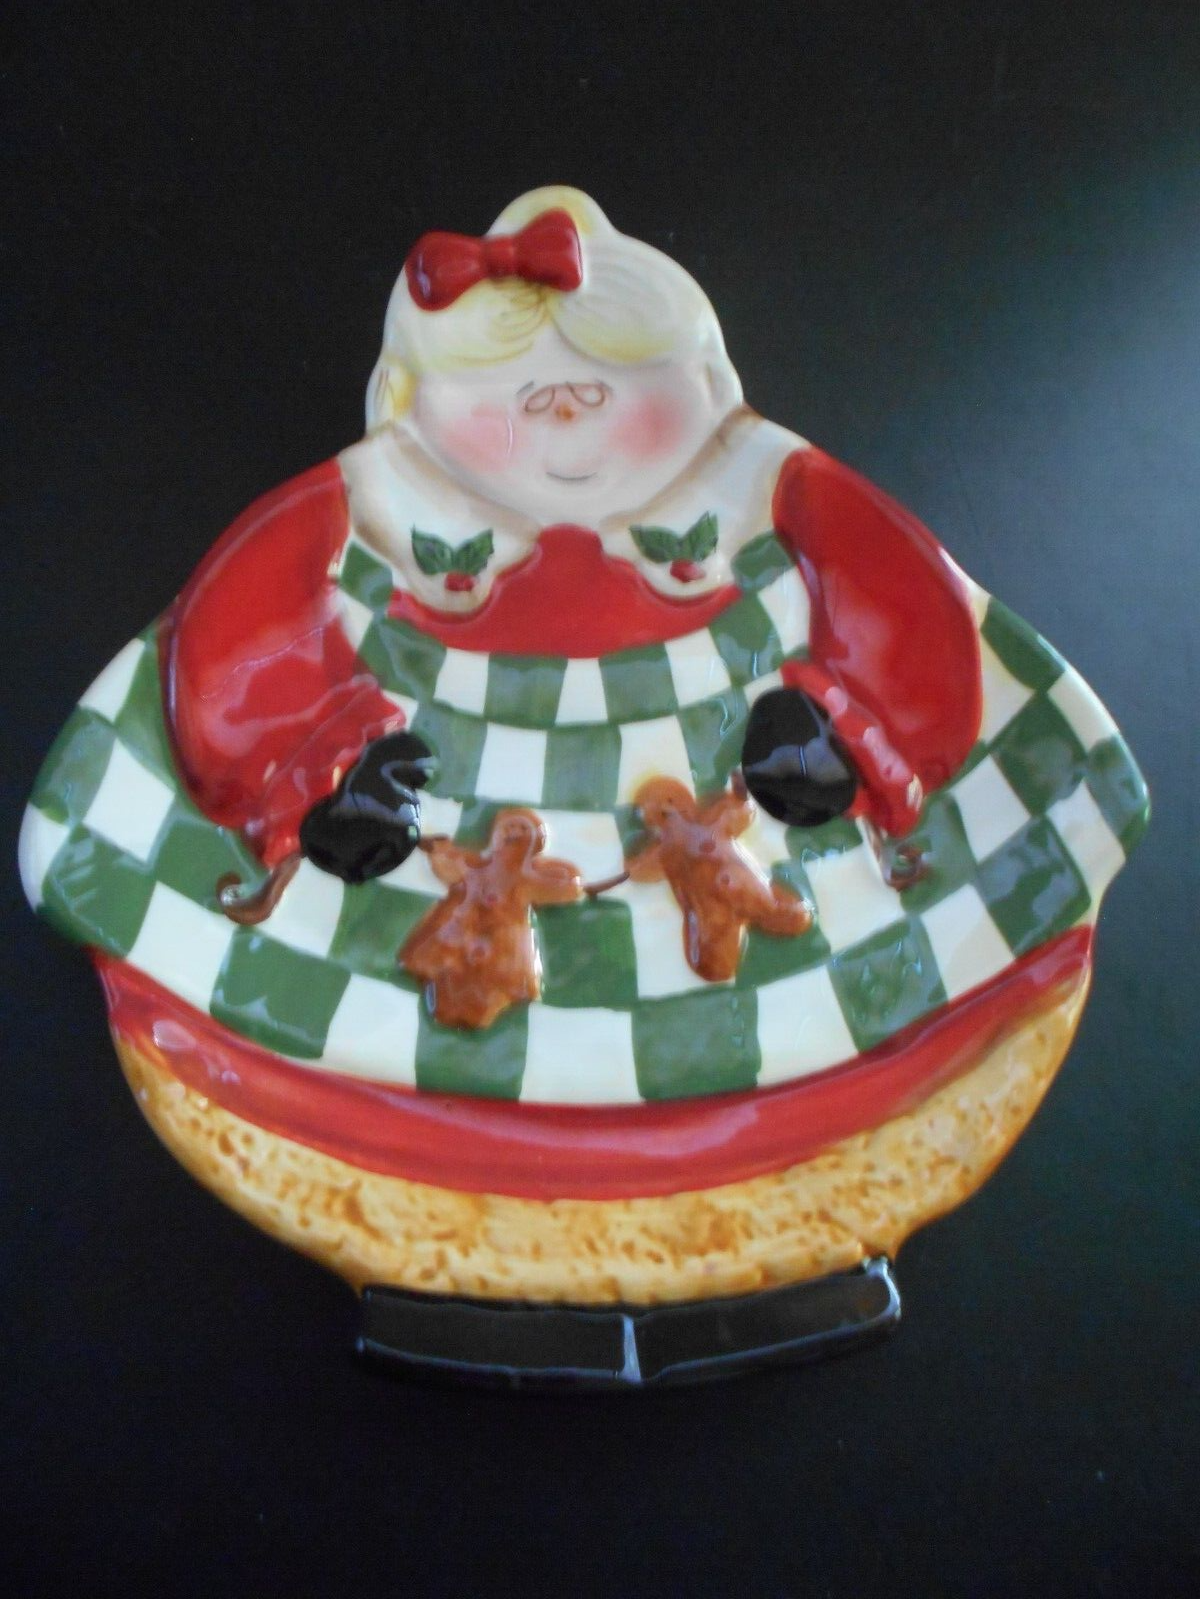 Primary image for Becca Barton Ceramic Mrs Claus Cookie Plate Certified International 9 1/2x8